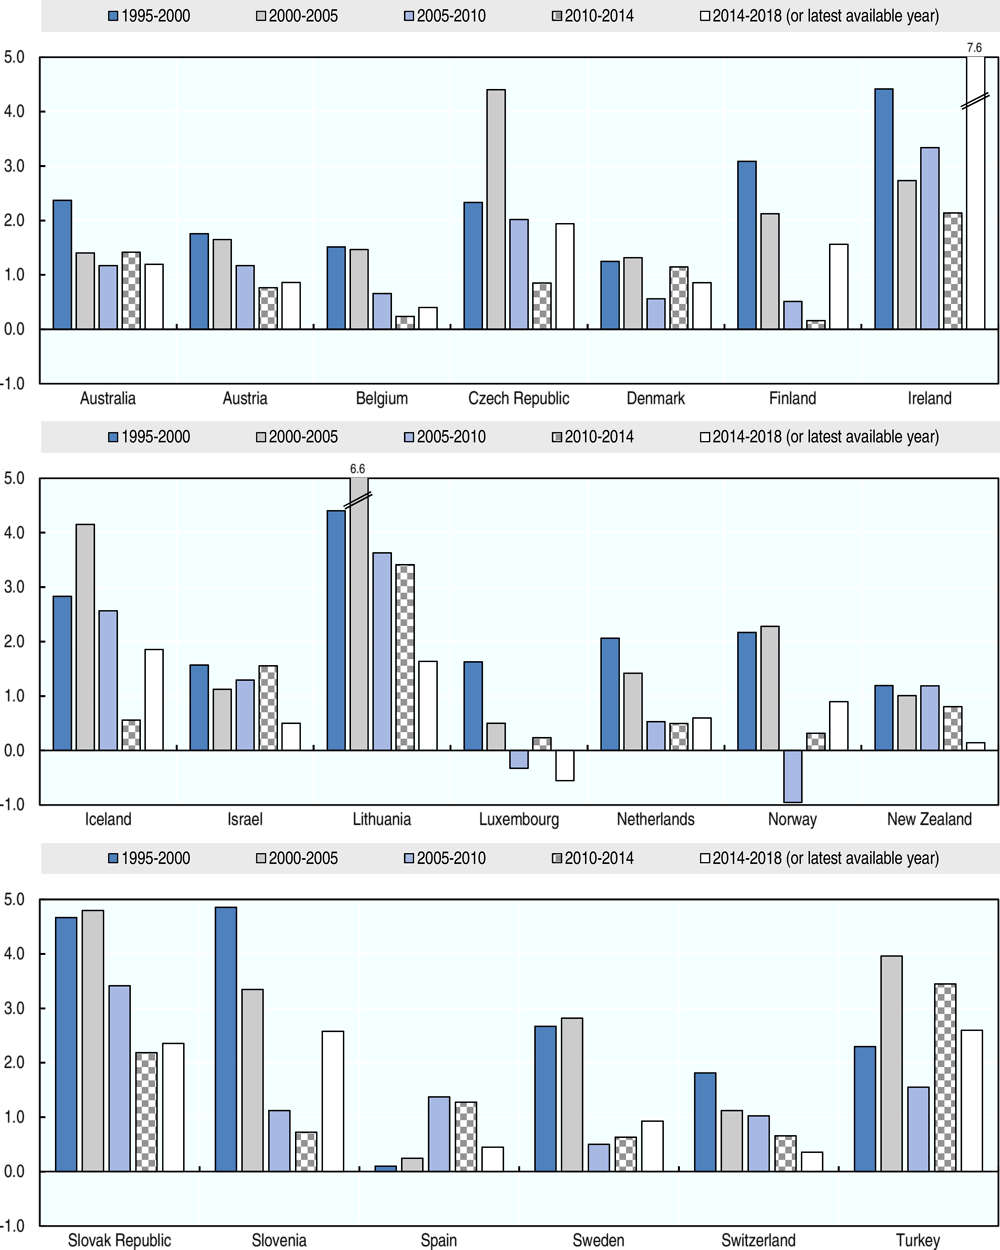 Annex Figure 1.A.1. Labour productivity growth in the OECD